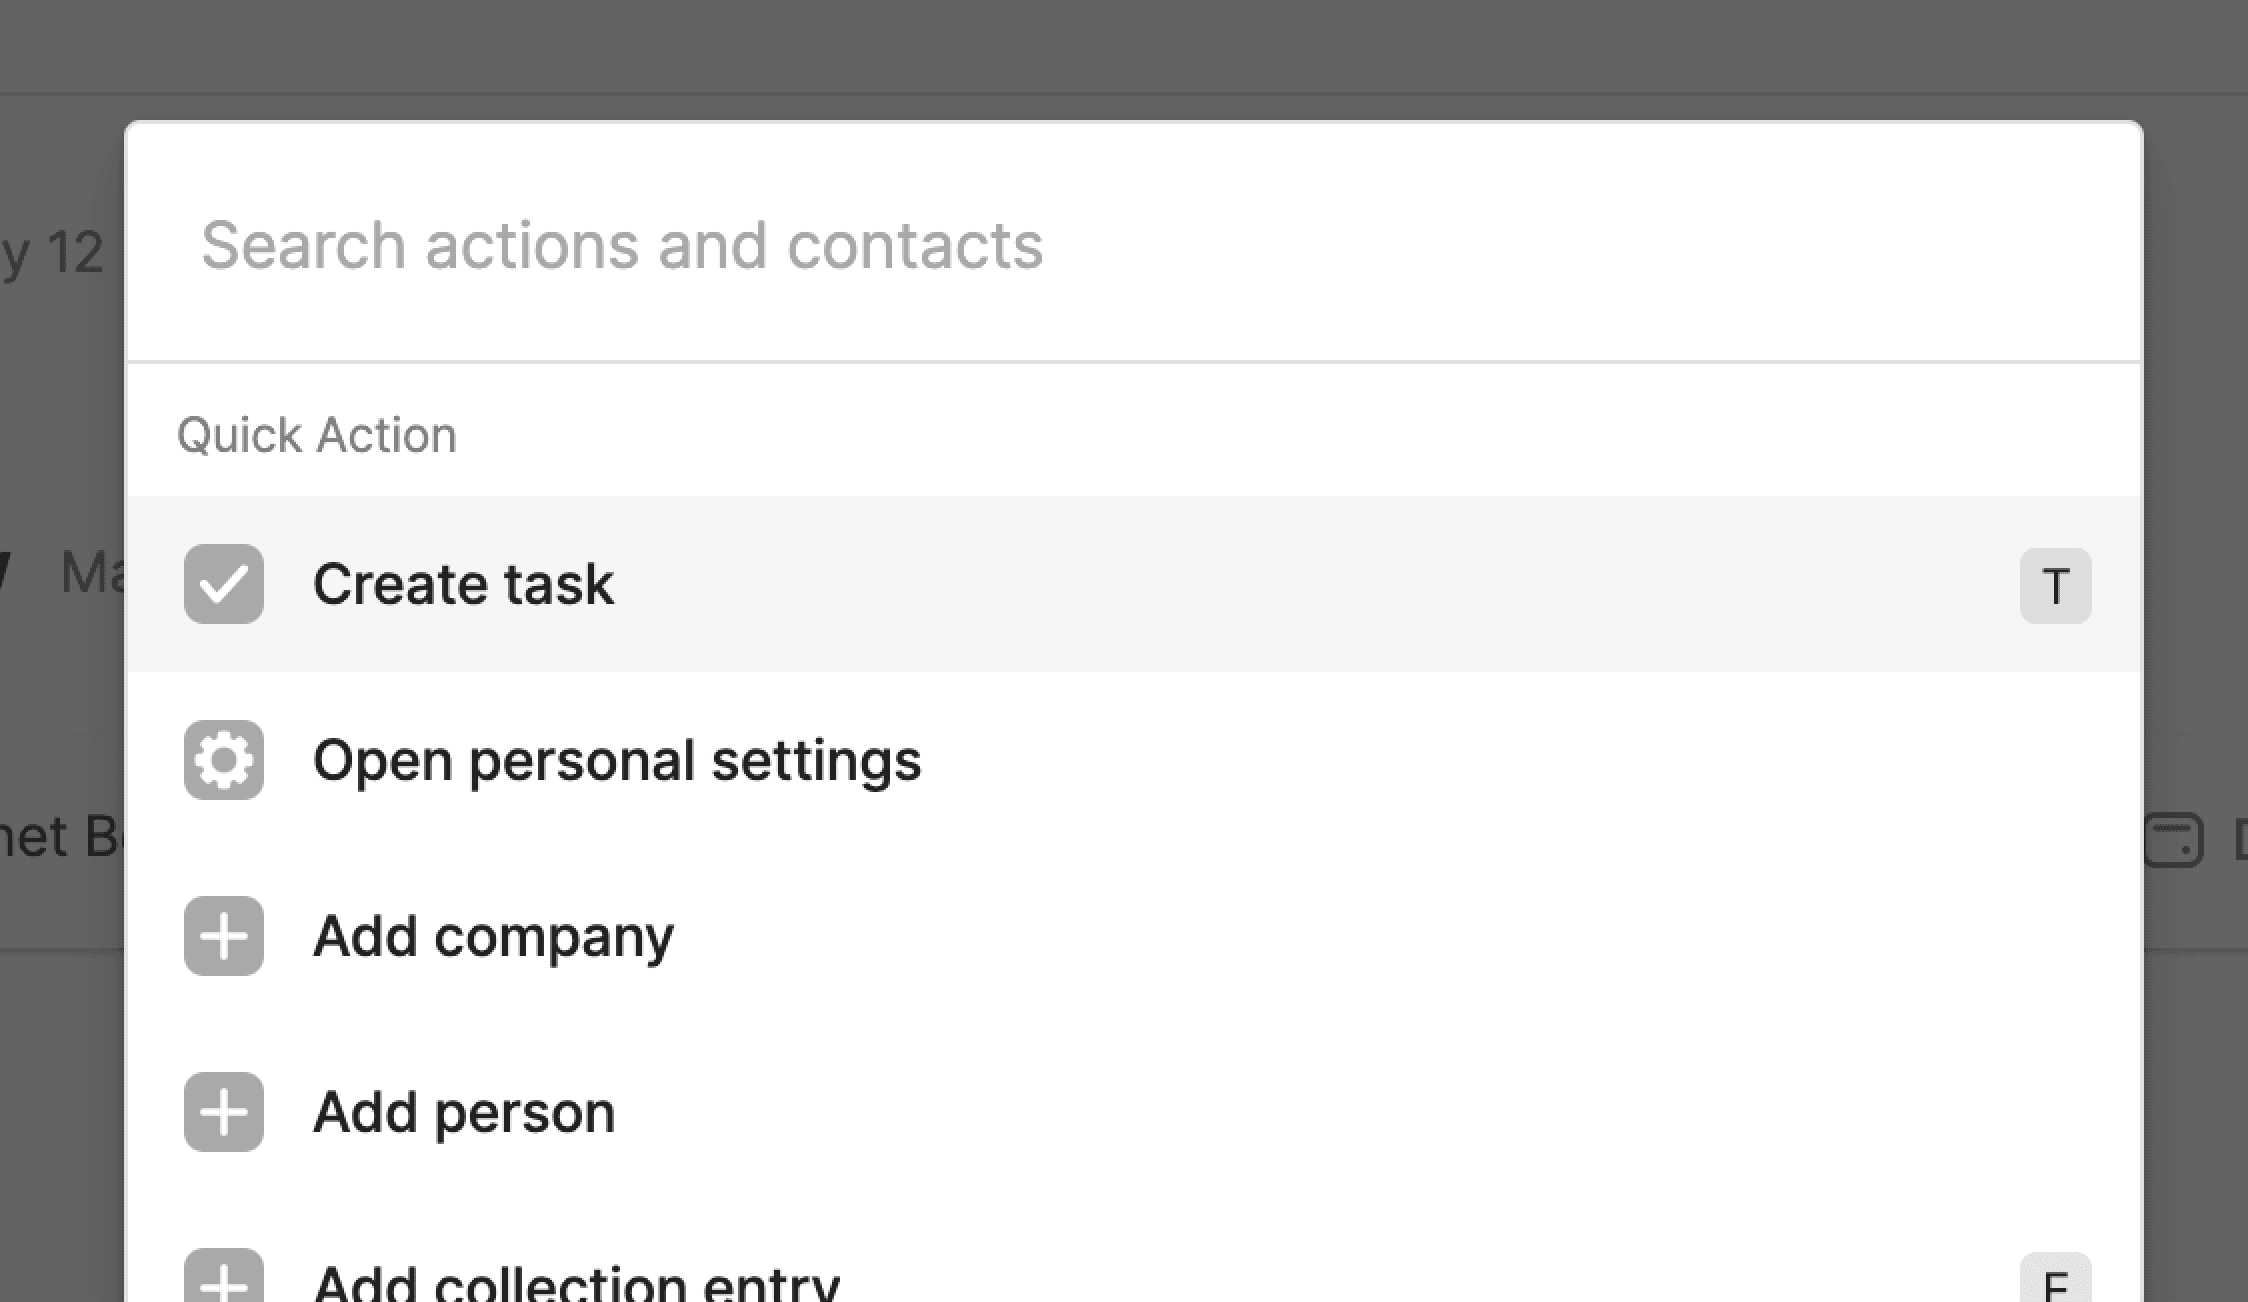 Attio's quick actions dialogue box is shown, accessed with the keyboard shortcut cmd + k. The options for quick actions change depending where you are in Attio, but for this example you can see create task, open personal settings, add company, add person, and add list entry.